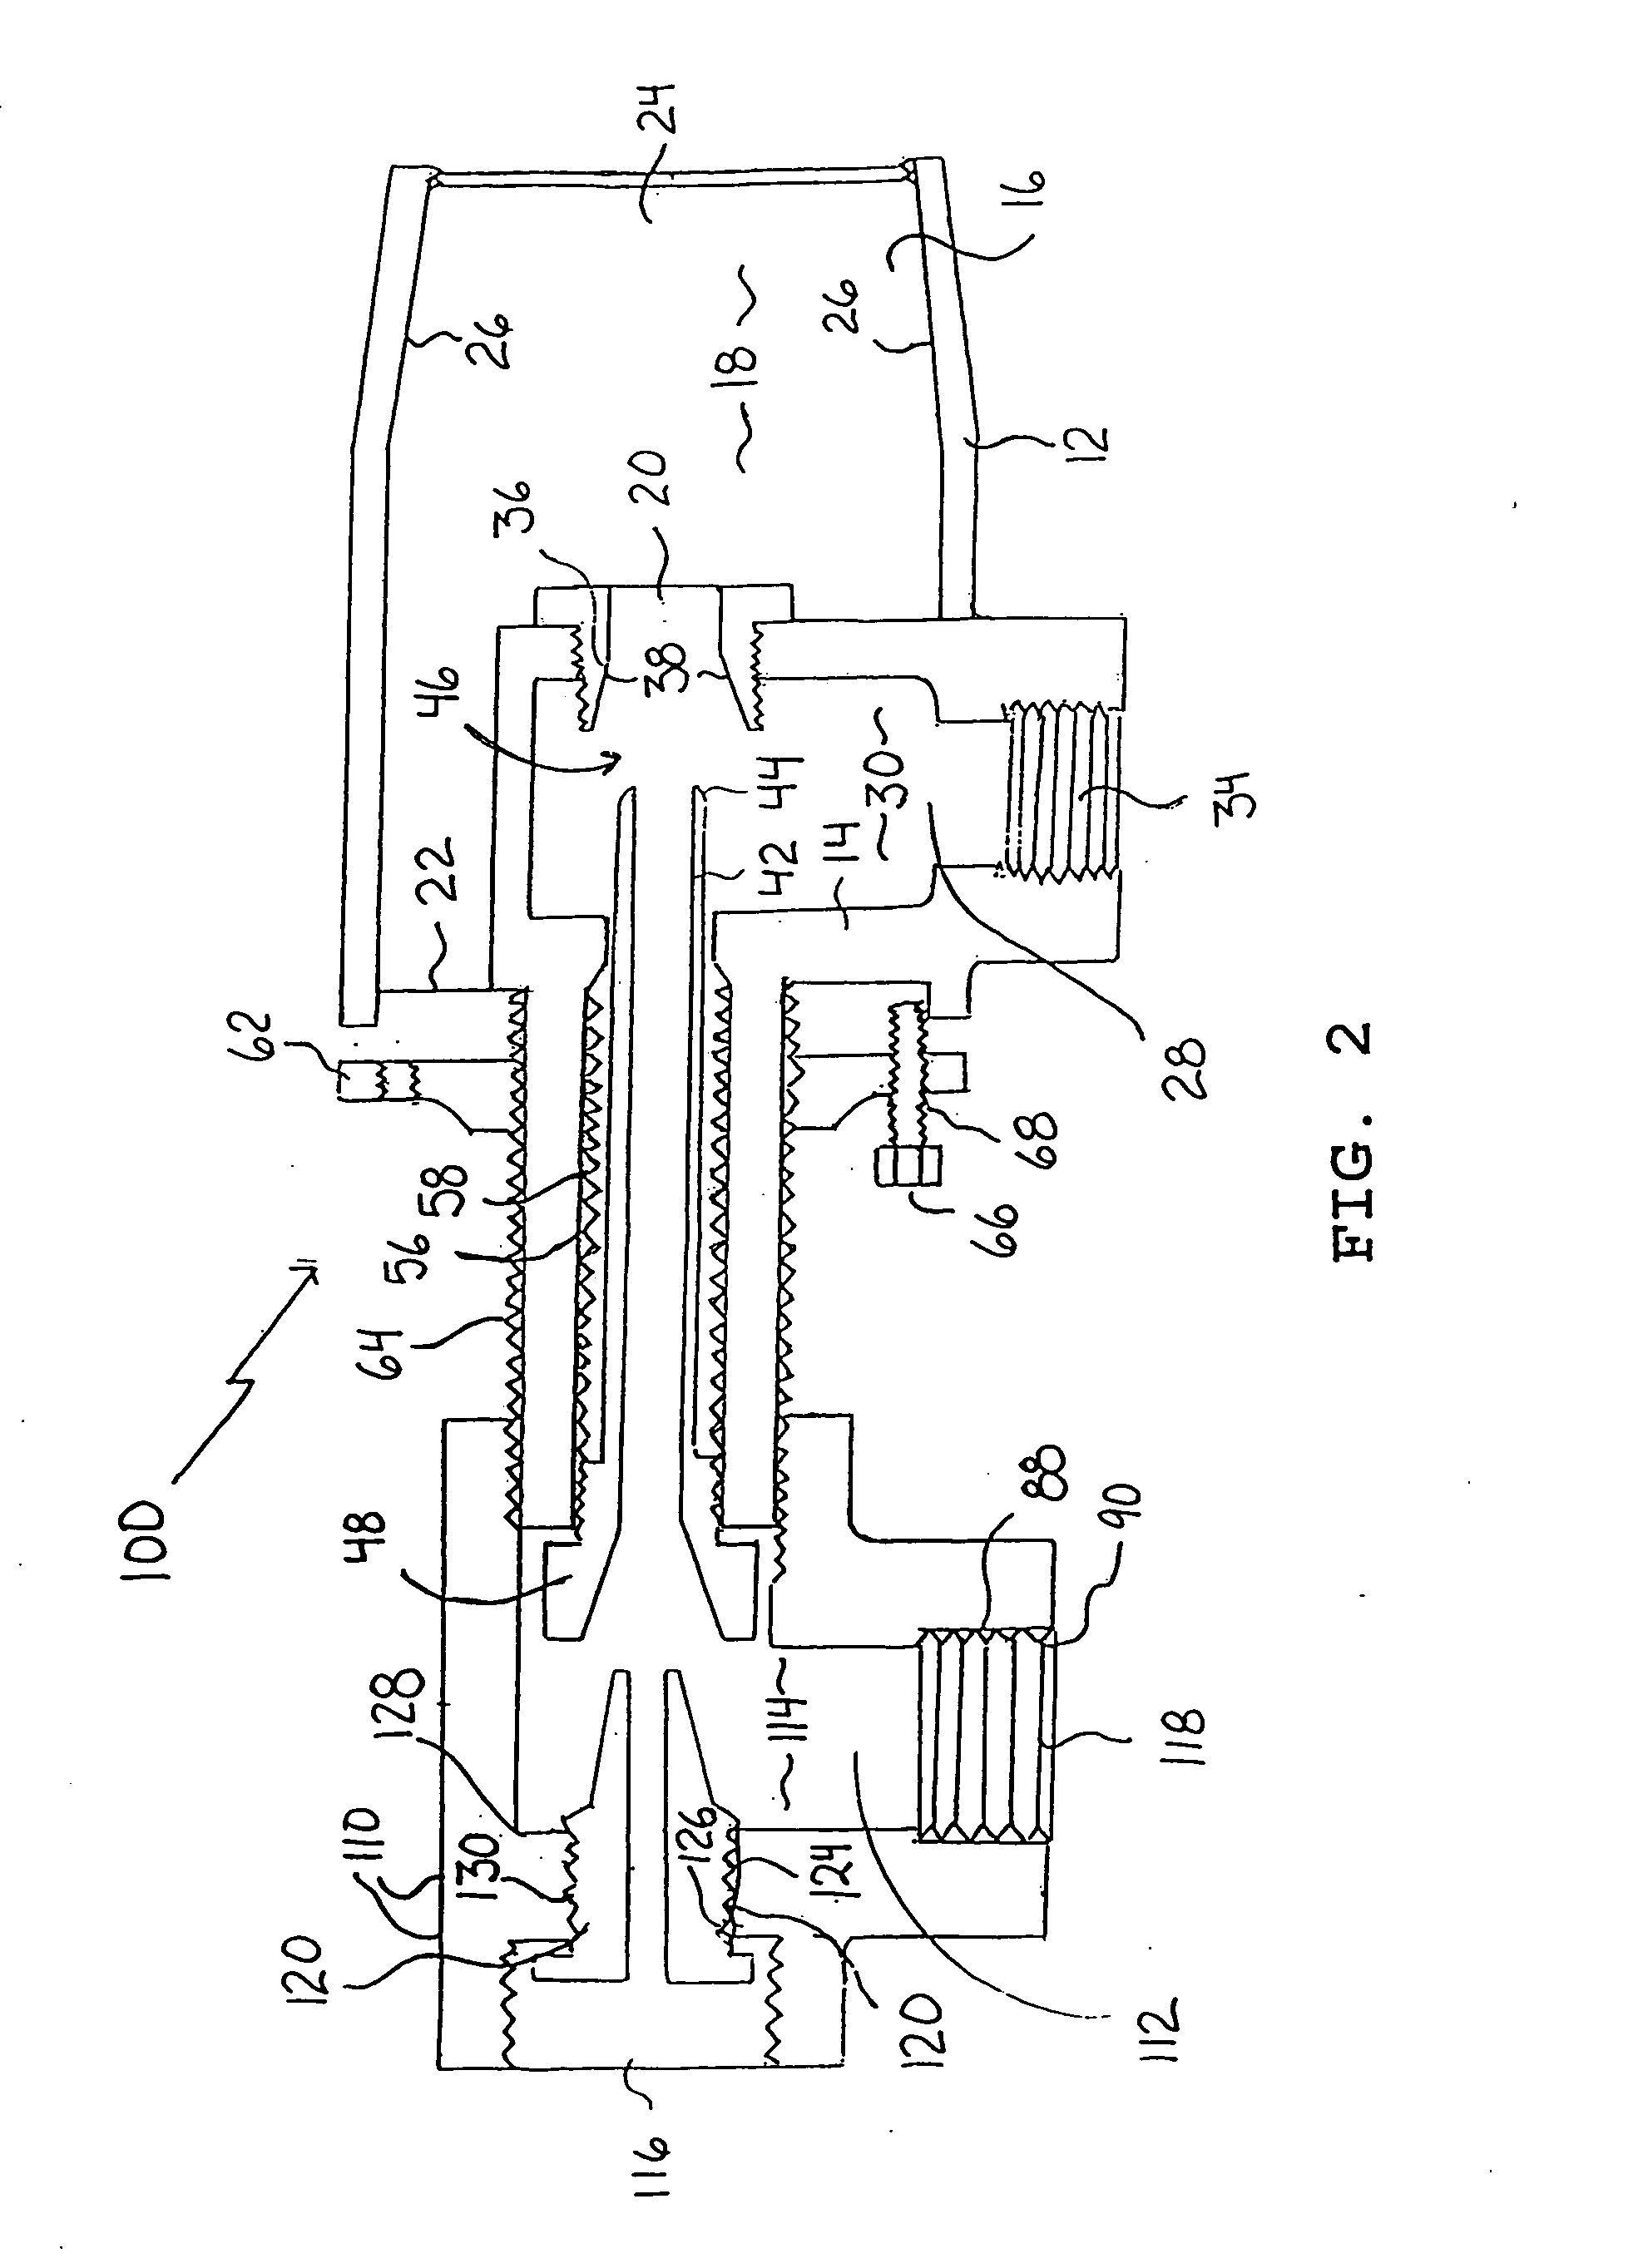 Burner fuel mixer head for concurrently burning two gaseous fuels